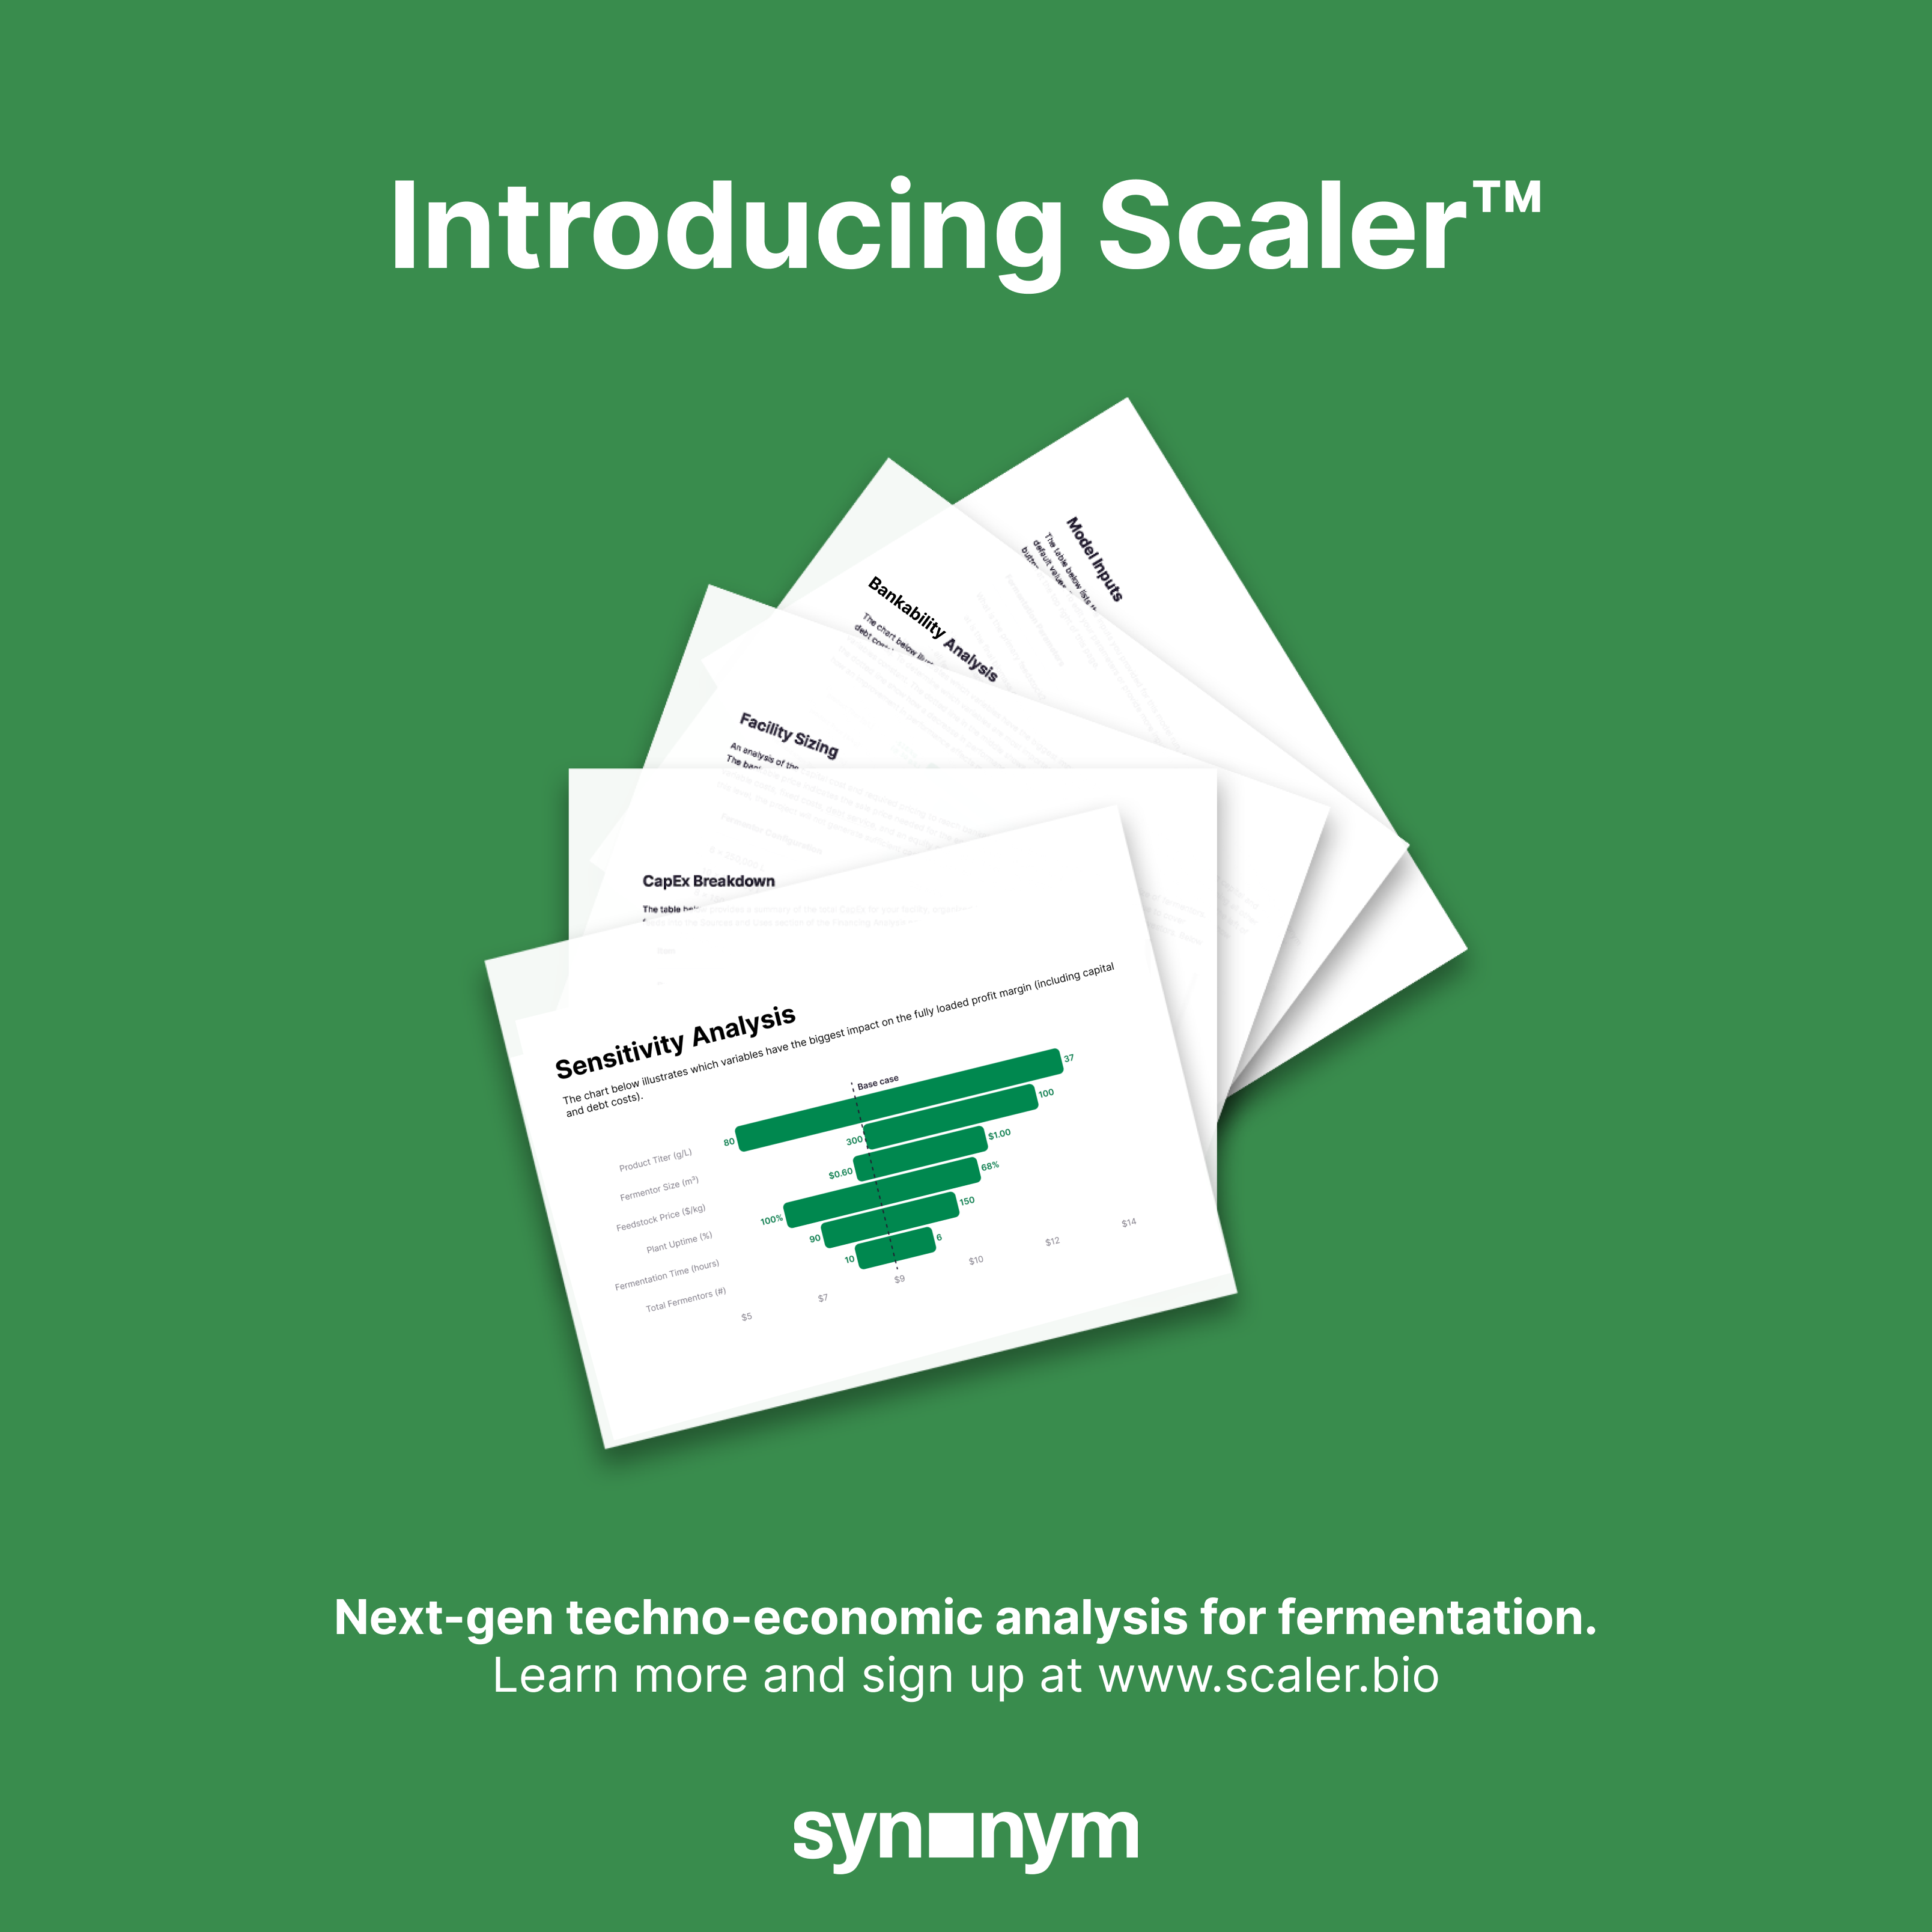 Synonym Launches Scaler, first-of-its-kind techno-economic